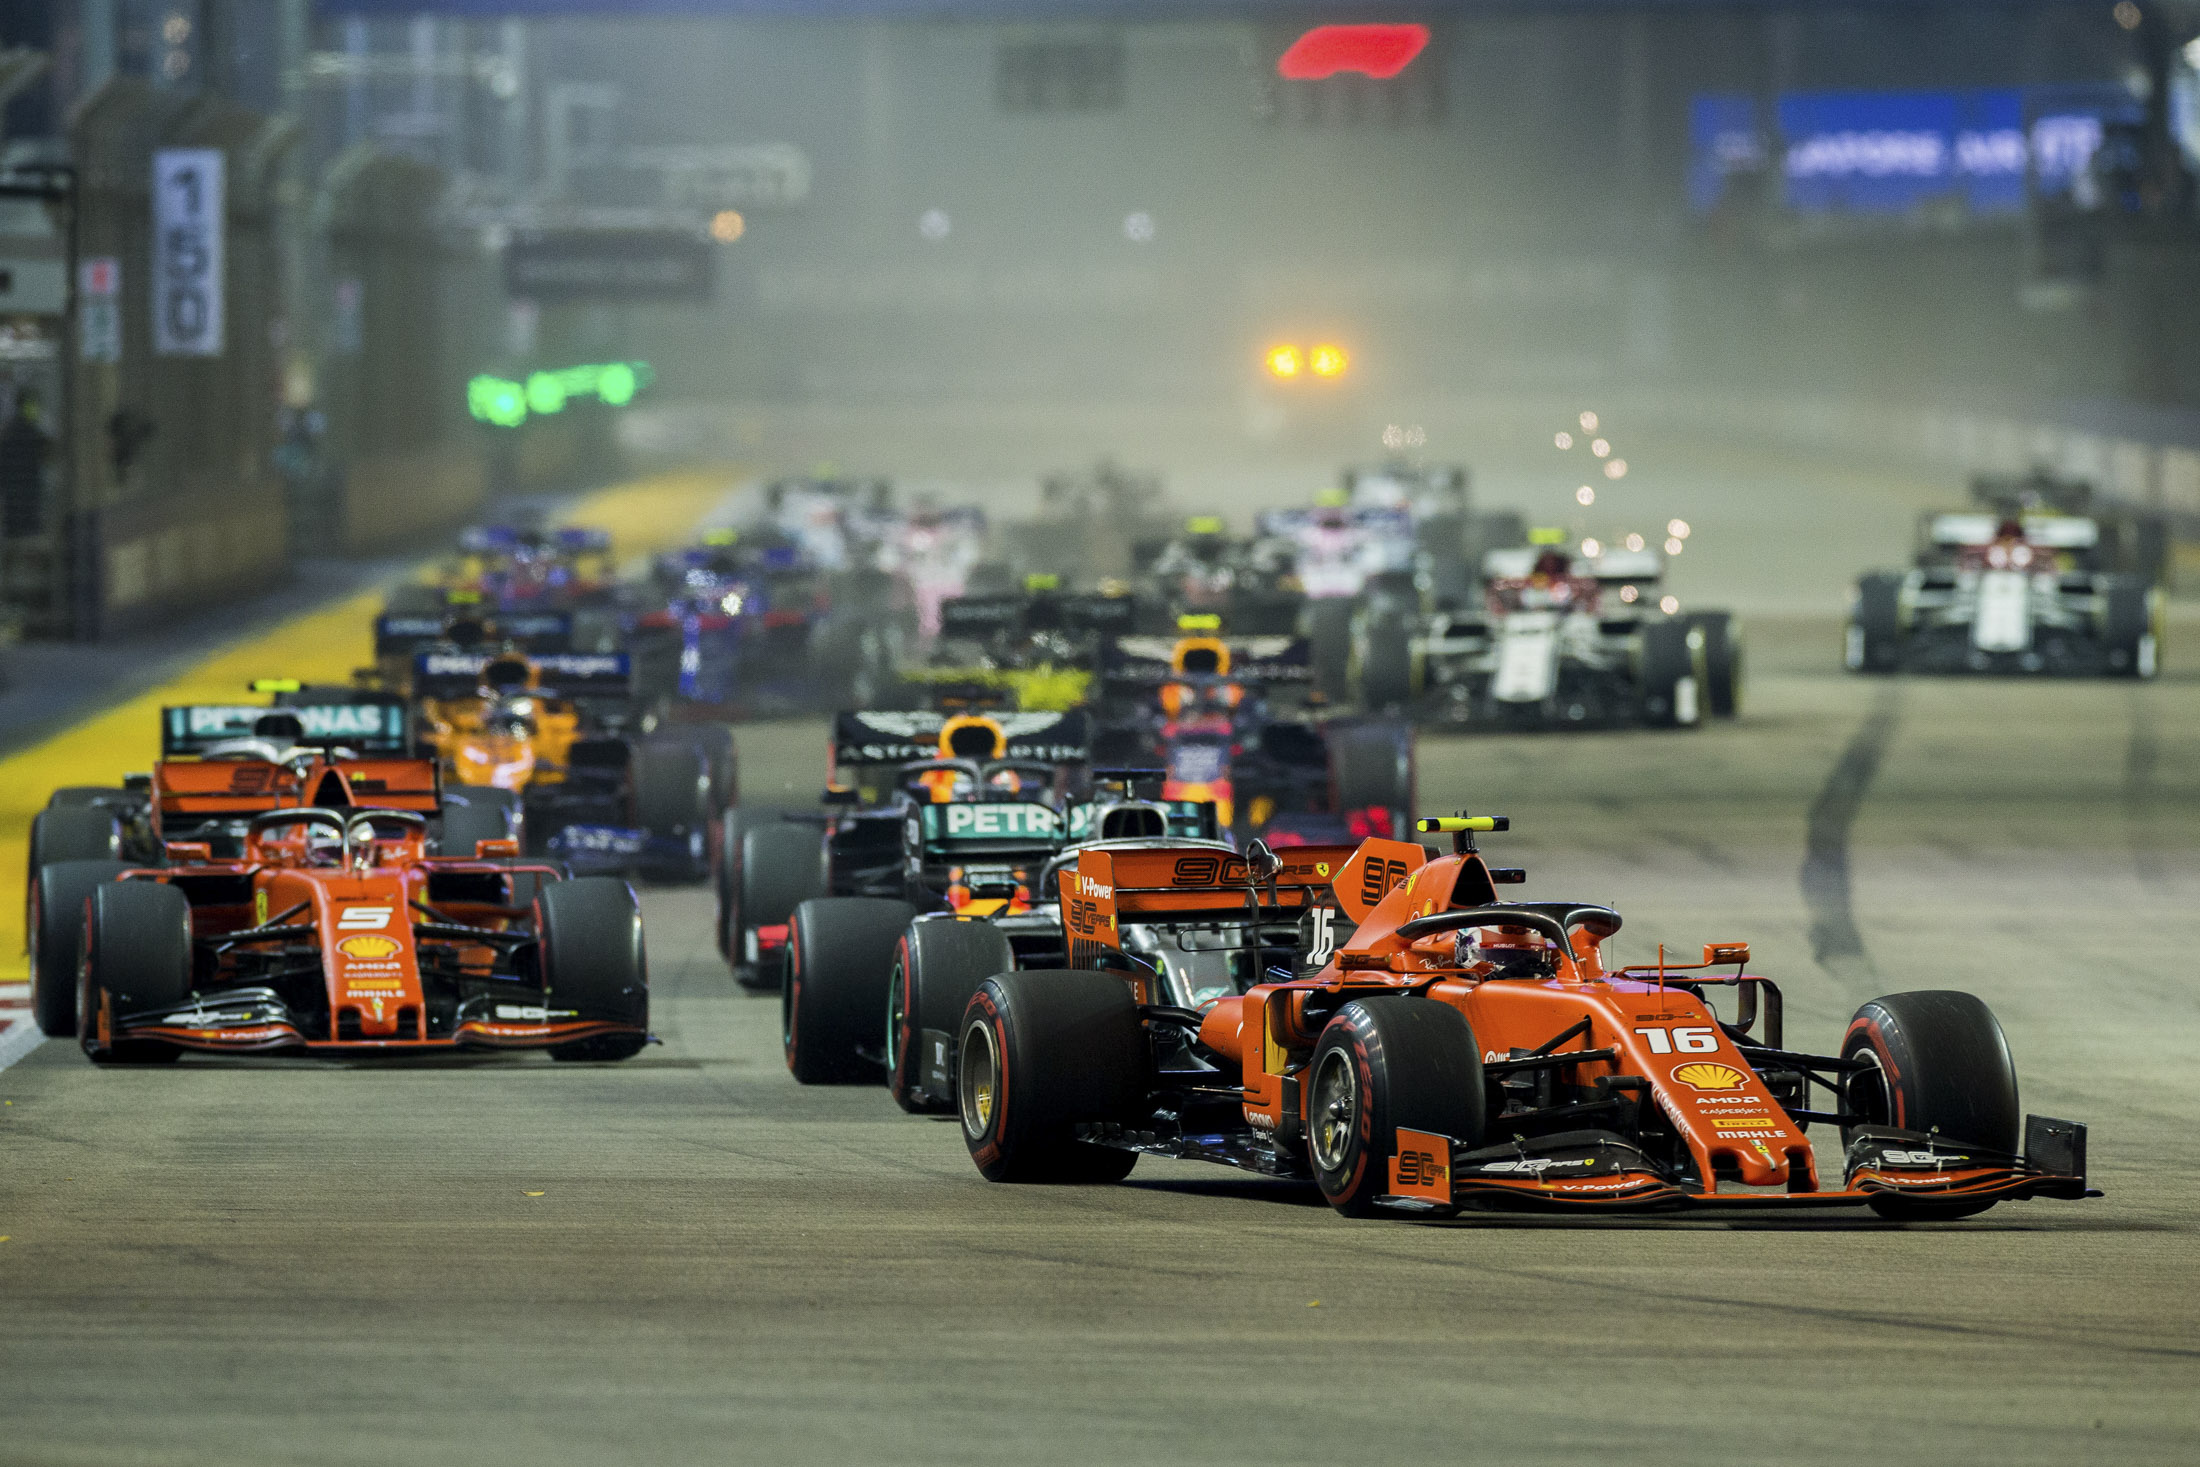 F1 Singapore Schedule? A Travel Guide to VIP Packages, Parties, Hotels on Track